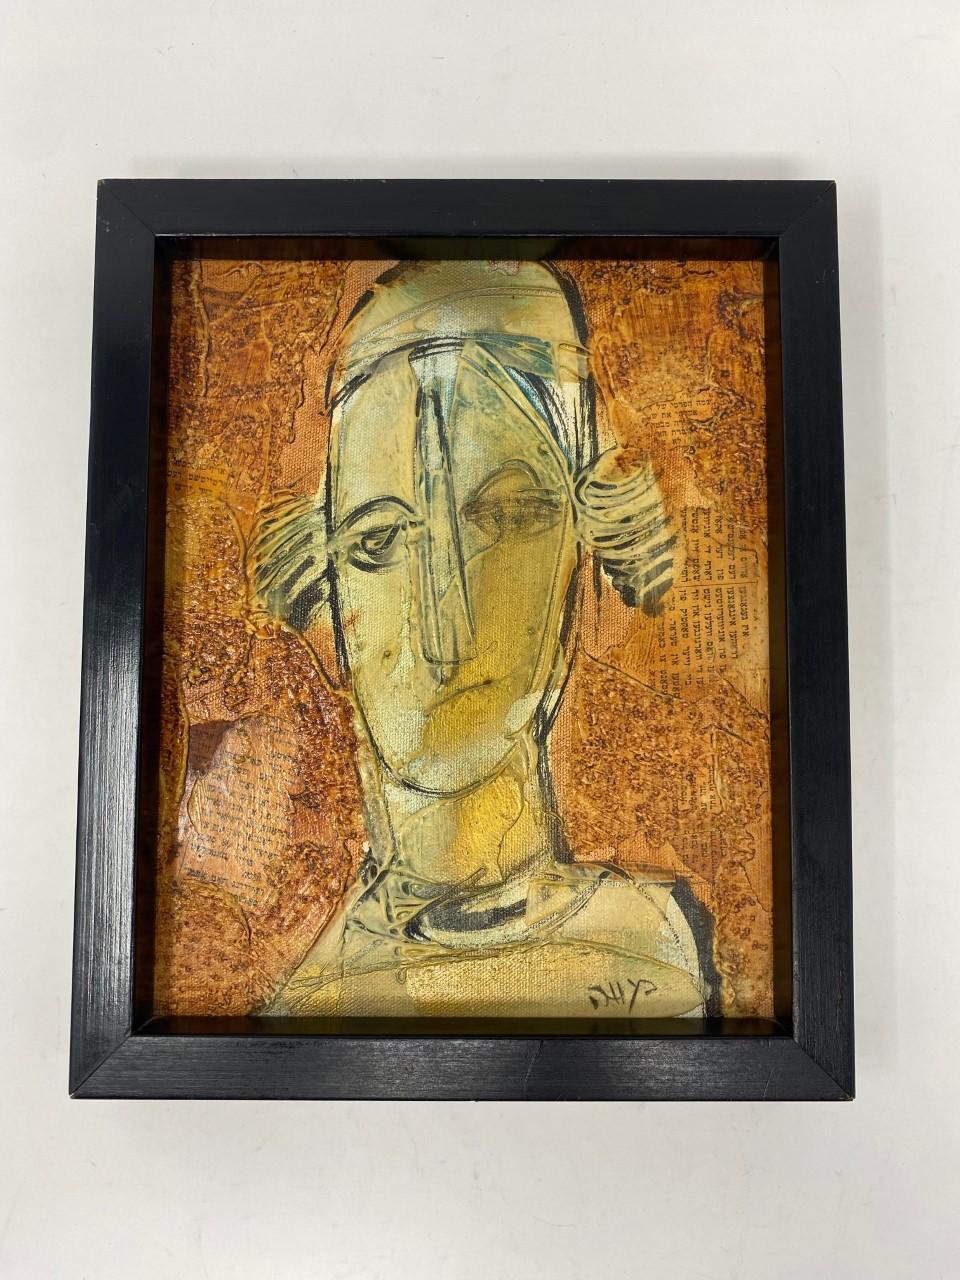 Highly textured portrait of a jewish man. This piece is fascinating, original and signed.
Moshe Katz was born March 2, 1937 in Bucharest, Romania. With his parents, he fled the Nazis and with much difficulty successfully made it safely to